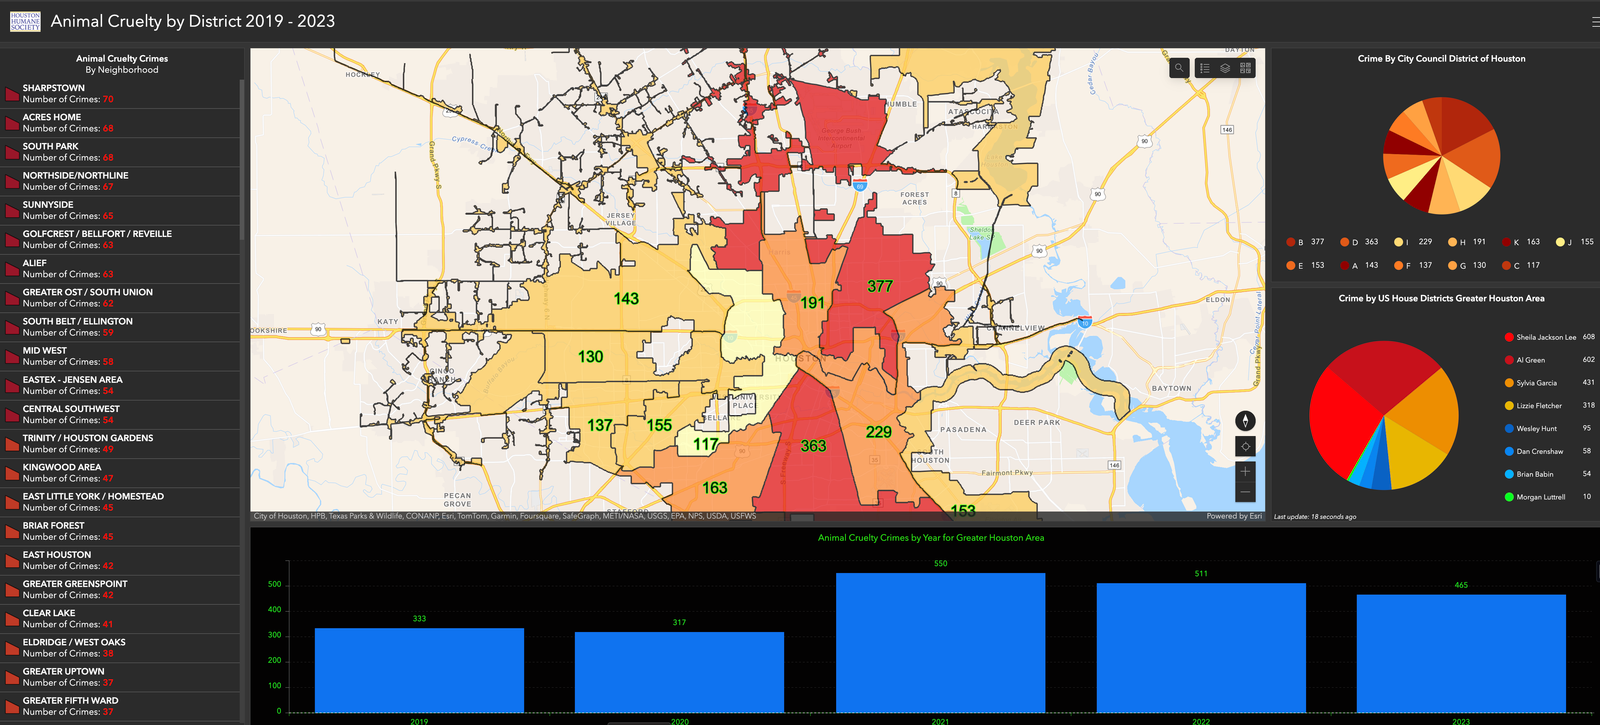 A comprehensive data dashboard titled 'Animal Cruelty by District 2019 - 2023' with various data visualizations. The main feature is a color-coded map of a region, presumably Houston, displaying the number of animal cruelty crimes per district, with numbers overlaid on different areas. Darker shades indicate higher crime numbers, ranging from red for the highest through orange to yellow for lower numbers. A sidebar lists neighborhoods and their respective number of crimes, with Sharpstown at 70 crimes at the top. Pie charts on the right show crime distribution by City Council District of Houston and by US House Districts Greater Houston Area, with color keys identifying political representatives alongside numbers of reported crimes. Below, bar graphs show animal cruelty crimes by year for the Greater Houston Area, with a notable increase in 2021. The dashboard is powered by a platform called 'Esri' and includes multiple sources such as City of Houston, HPB, Texas Parks & Wildlife, CONANP, Esri, TomTom, Garmin, and others.